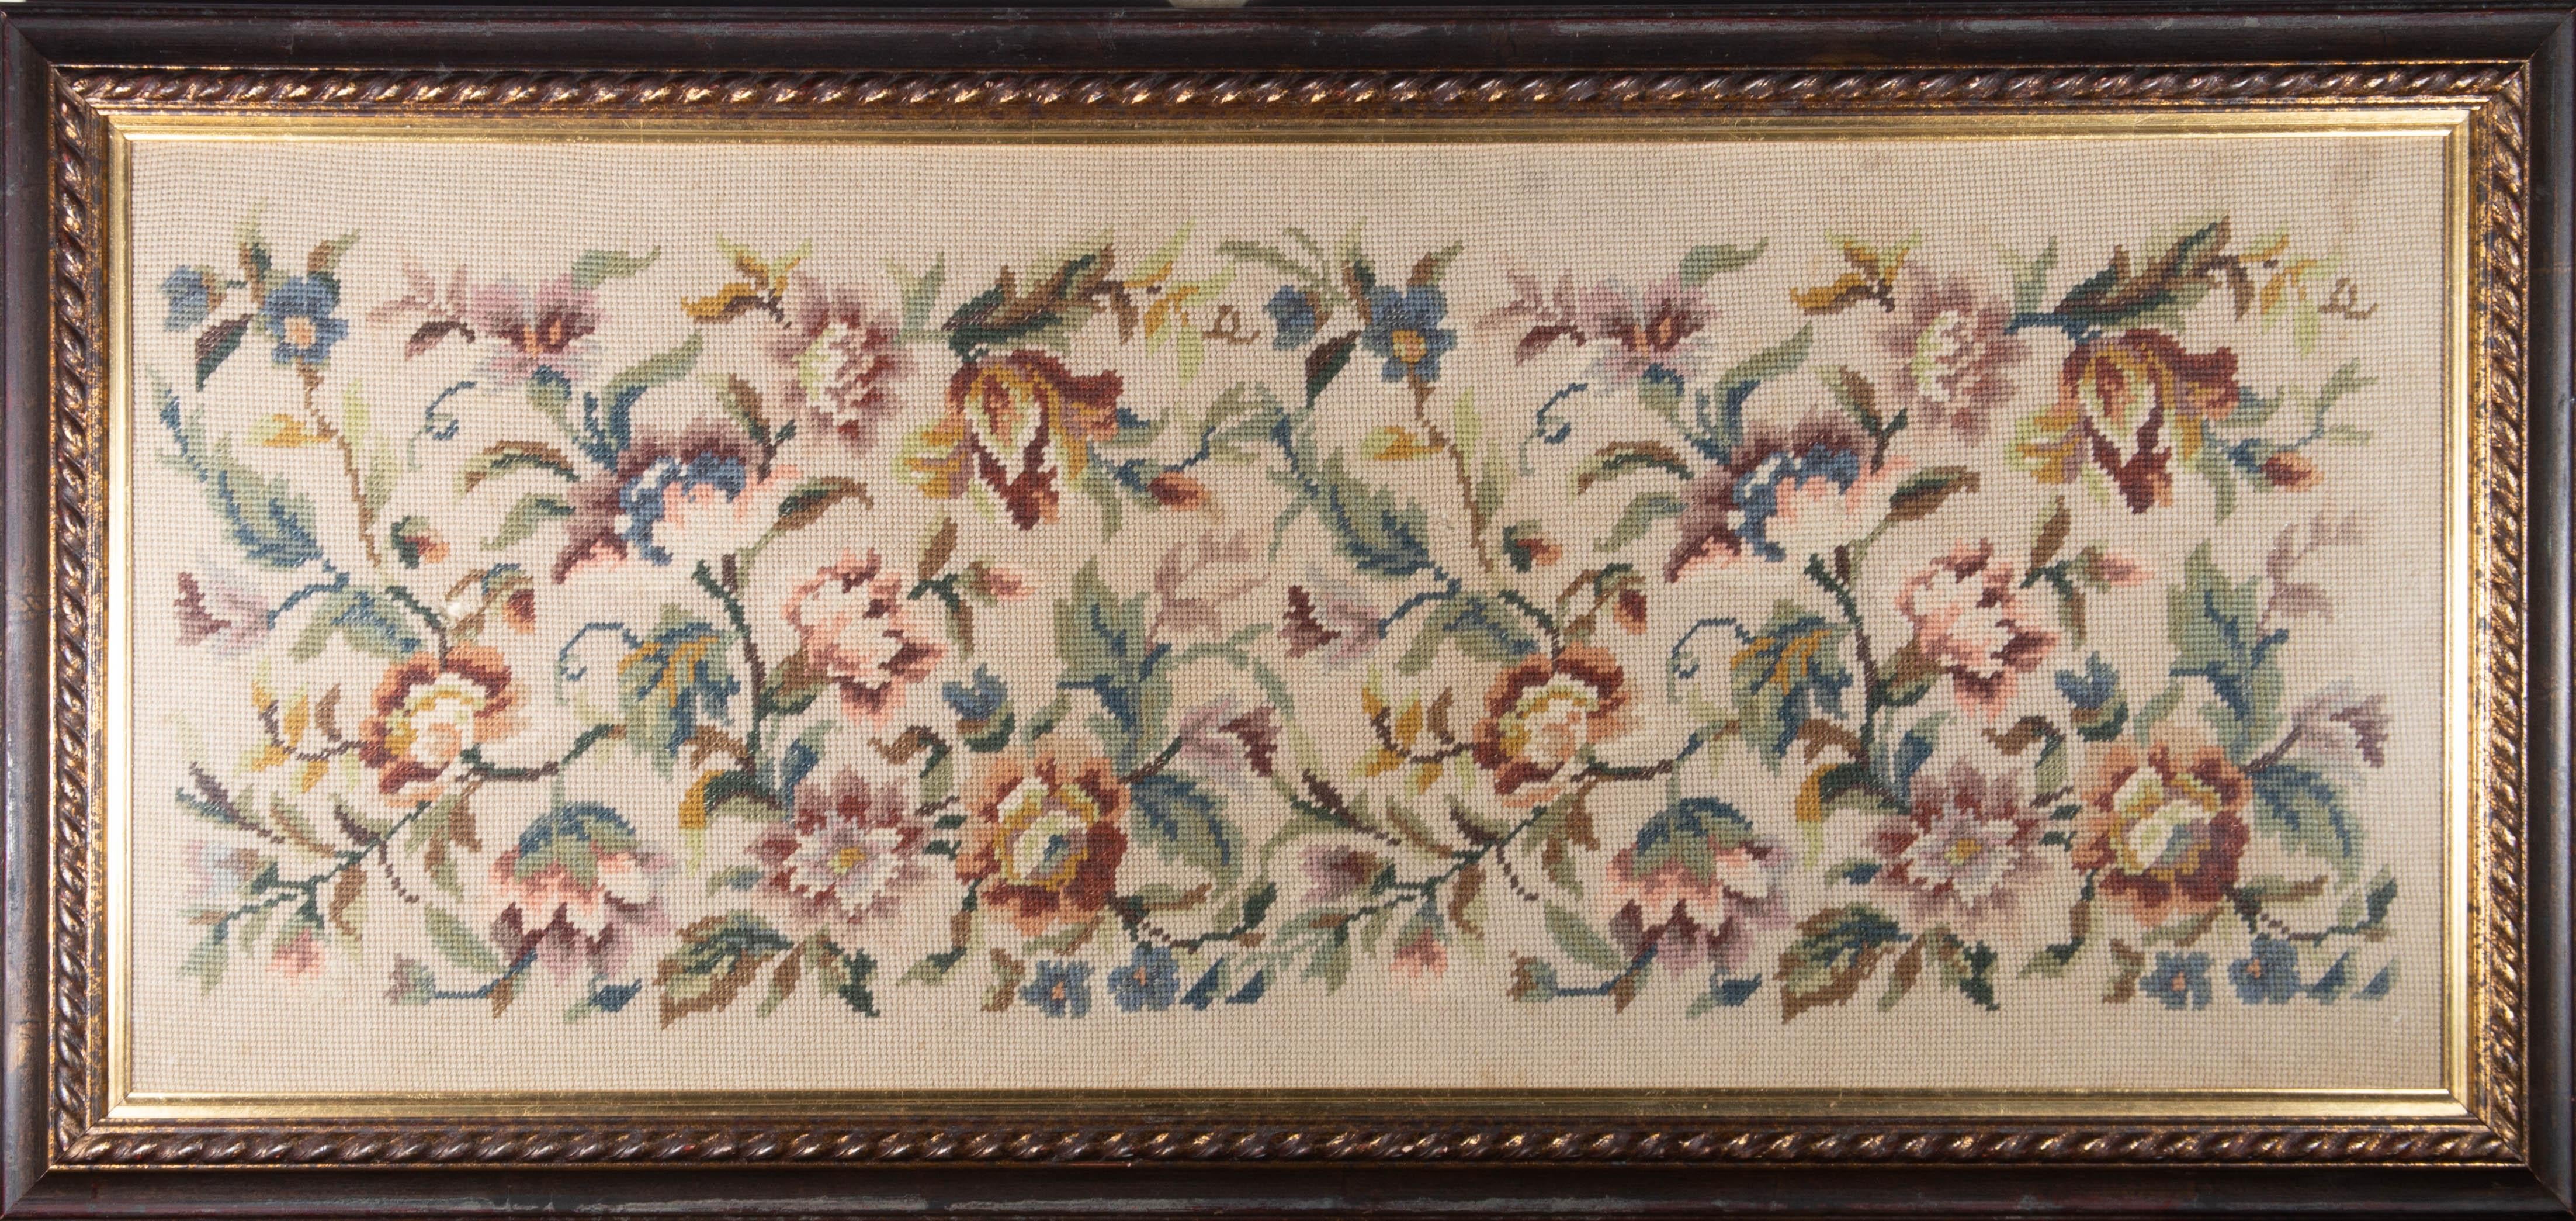 Early 20th Century Embroidery - Flowers and Leaves - Art by Unknown